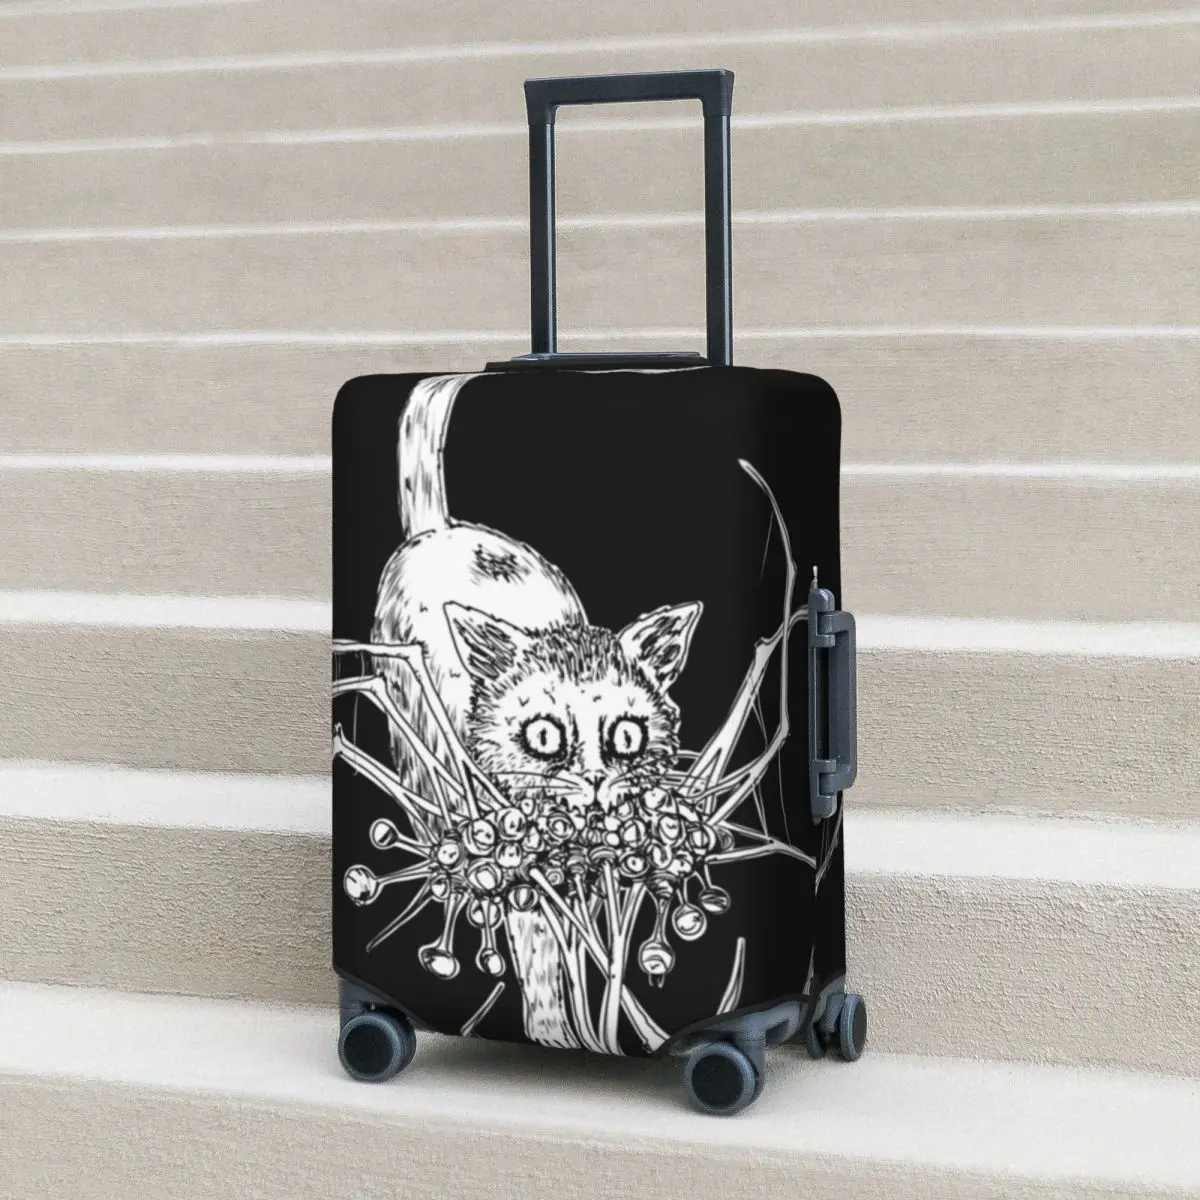 

SOUICHI 27 S BELOVED PET Suitcase Cover Junji Ito manga spider creepy horror Travel Flight Fun Luggage Accesories Protection